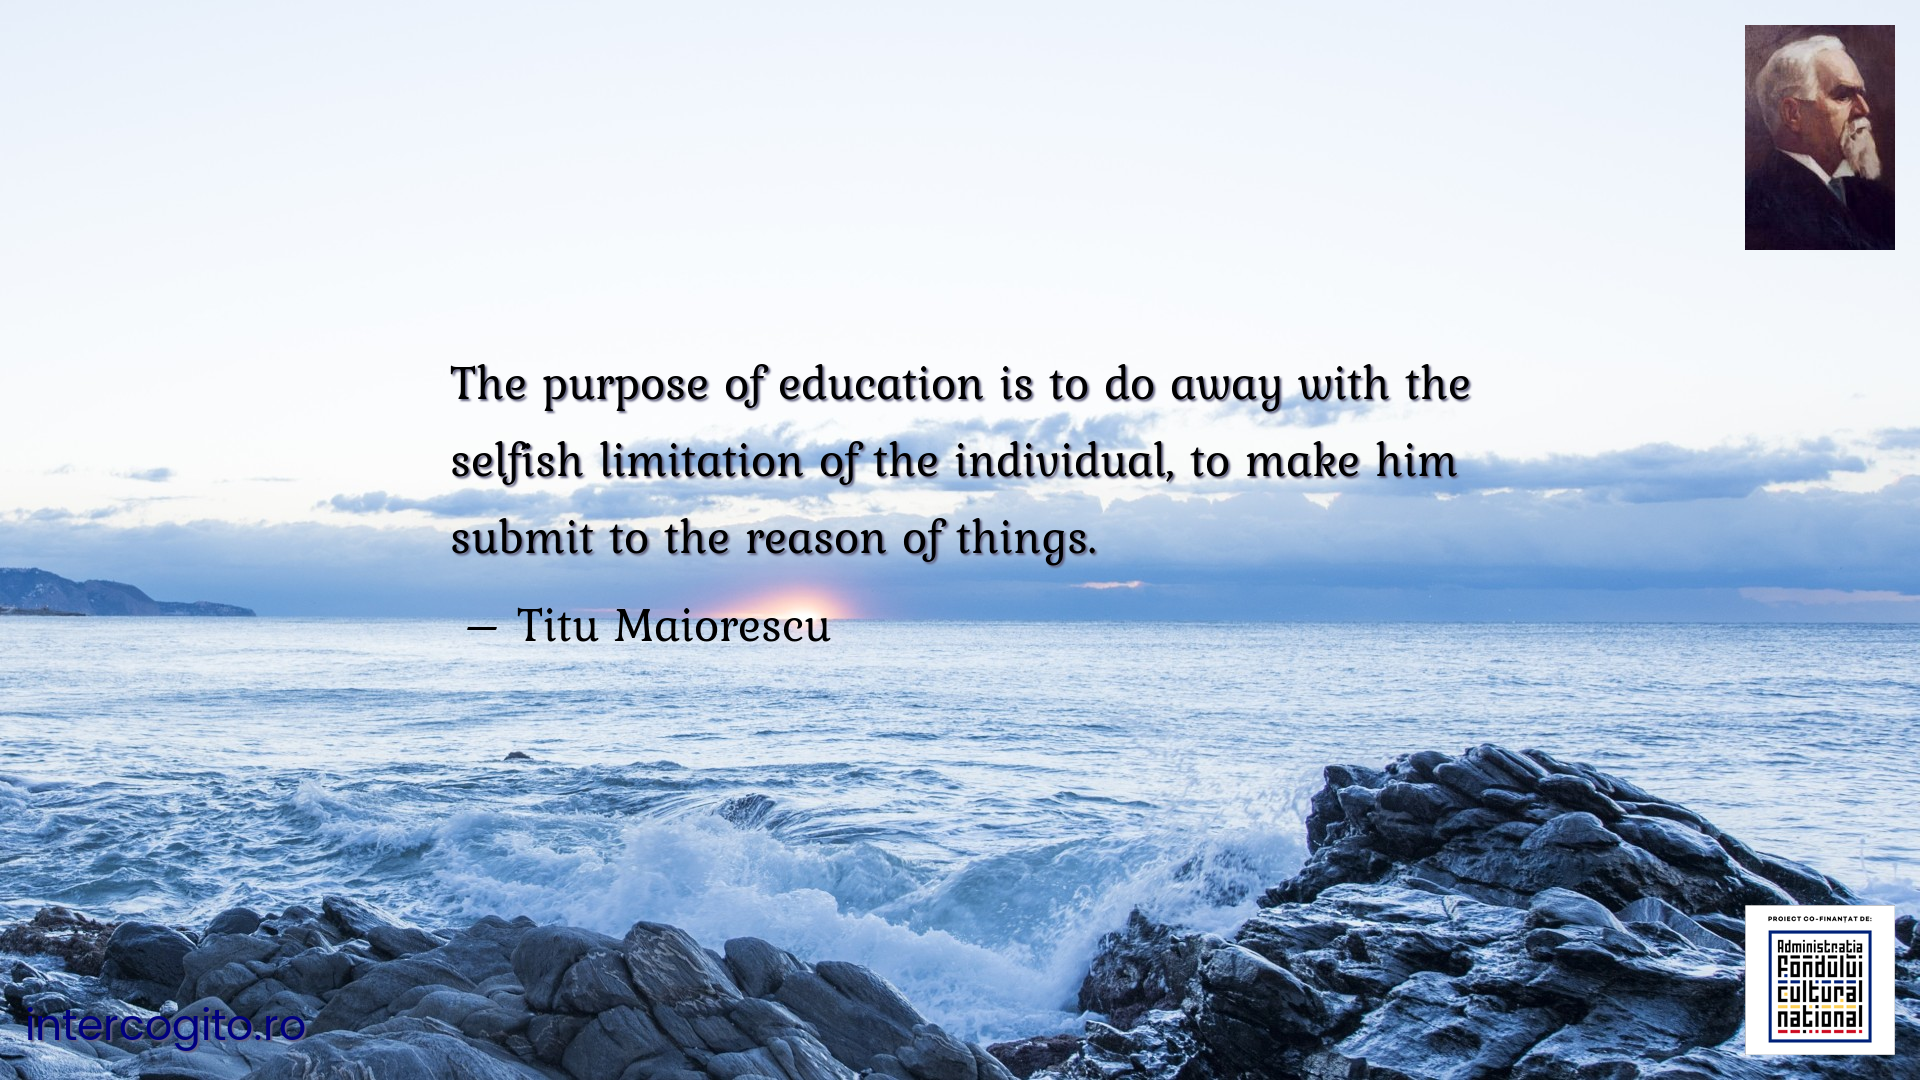 The purpose of education is to do away with the selfish limitation of the individual, to make him submit to the reason of things.